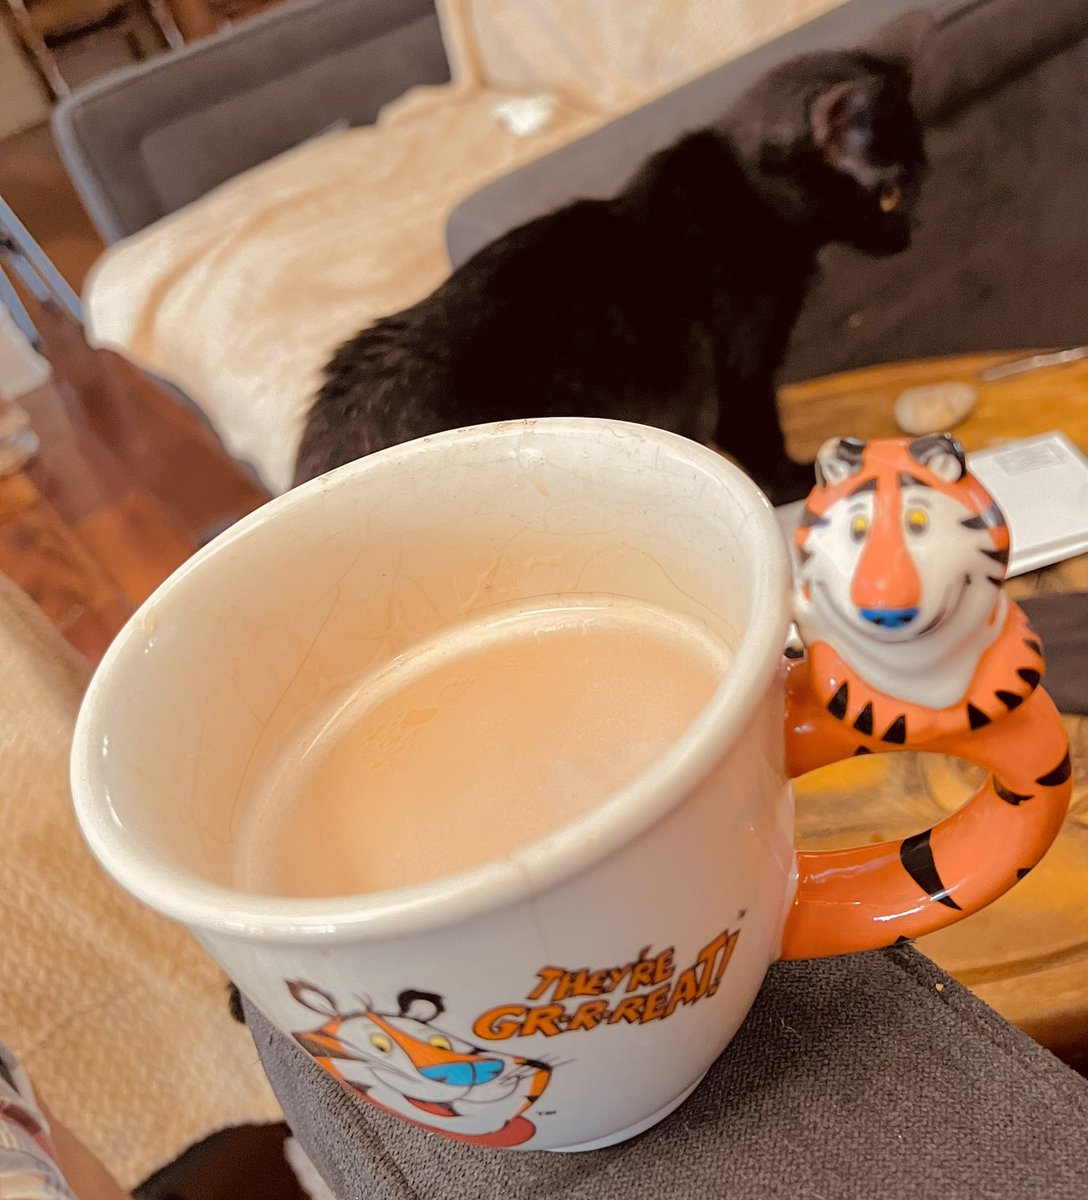 RT @Whom_Thor: Coffee with Tony the Tiger and Pumpkin the Kittah. https://t.co/mxlMjj6W2A